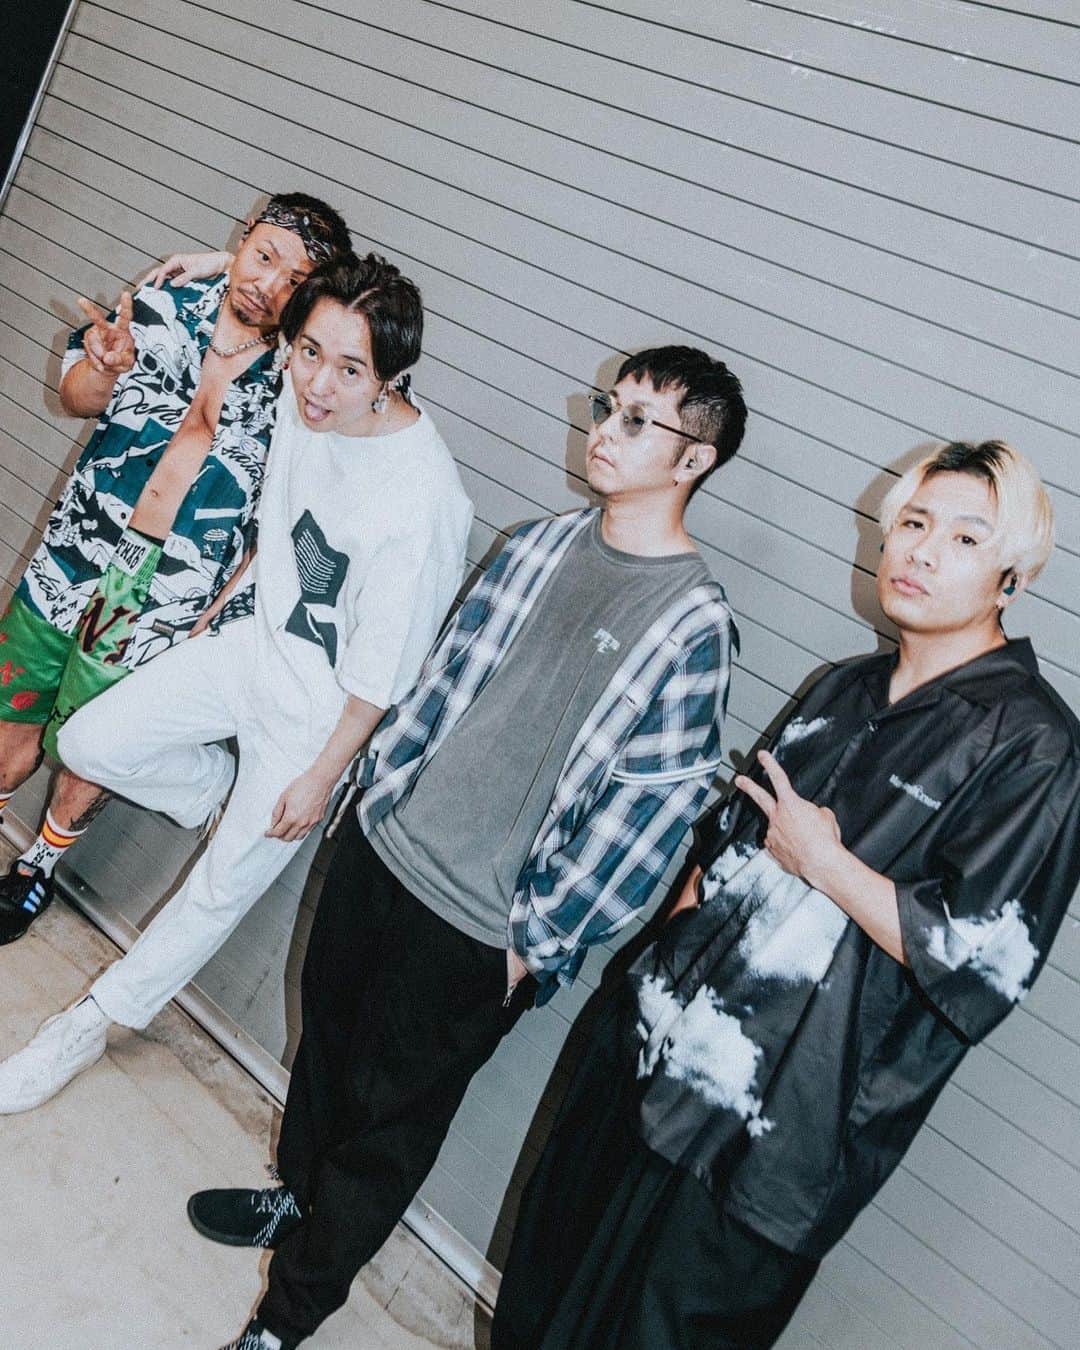 NOISEMAKERのインスタグラム：「THANK YOU 福岡! THANK YOU  MY FIRST STORY! ROAD TO 20th ANNIVERSARY ZEPP TOUR 最高の初日になりました！ 皆さんありがとうございました！ 次は8.10 (THU) Zepp Nagoya! 📷 by @nekoze_photo」